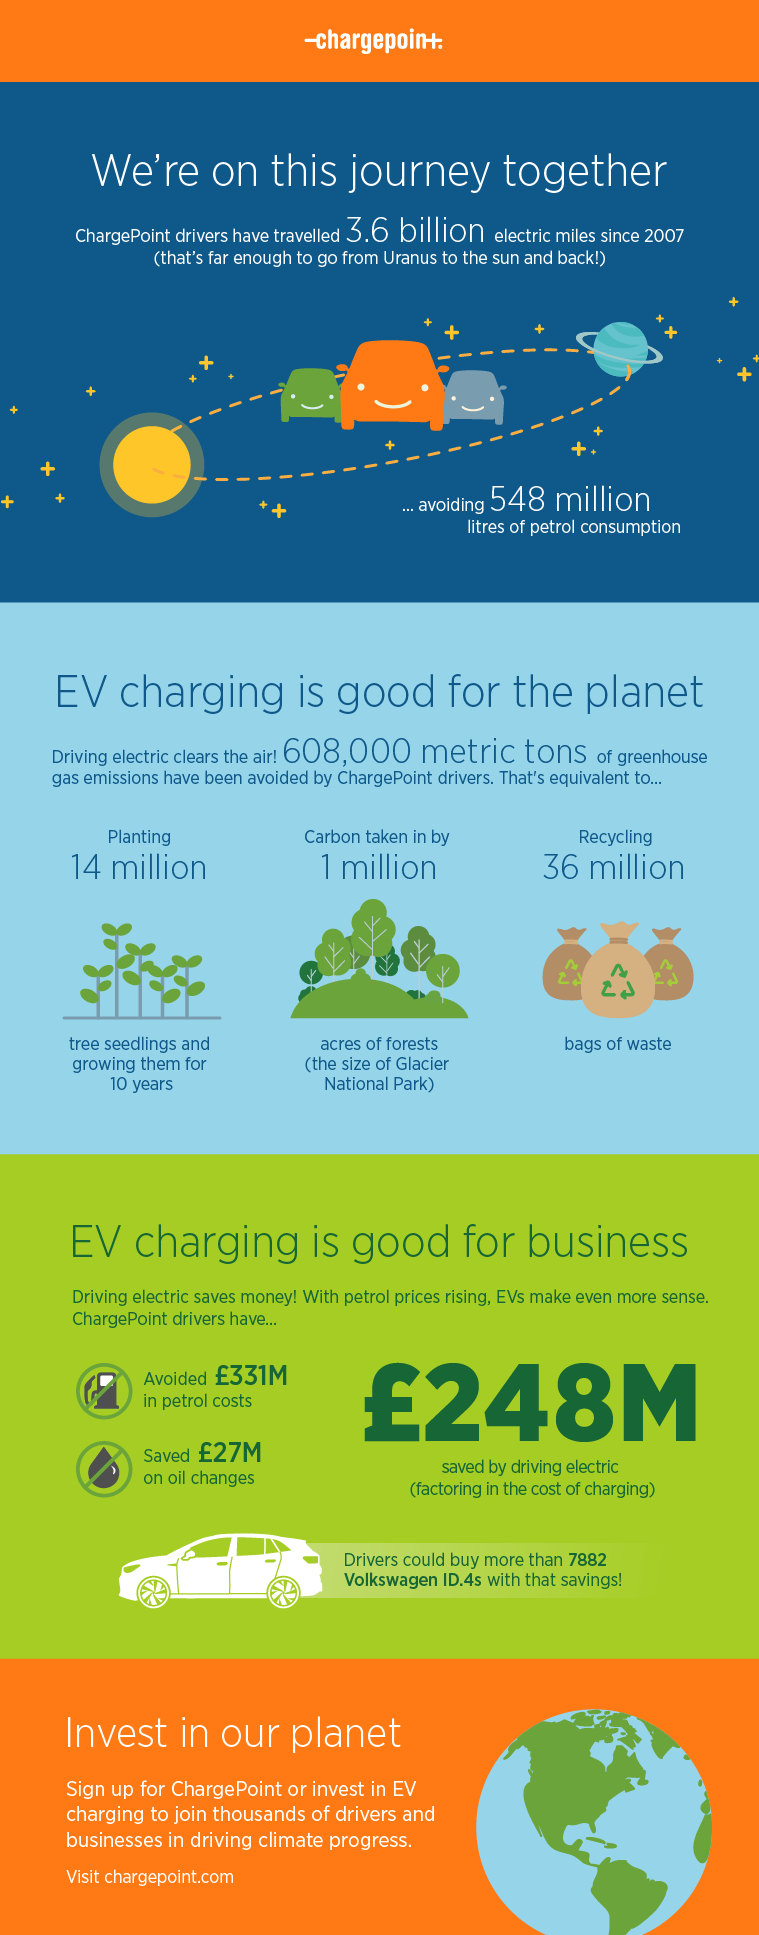 Invest in the planet on Earth Day with ChargePoint EV charging